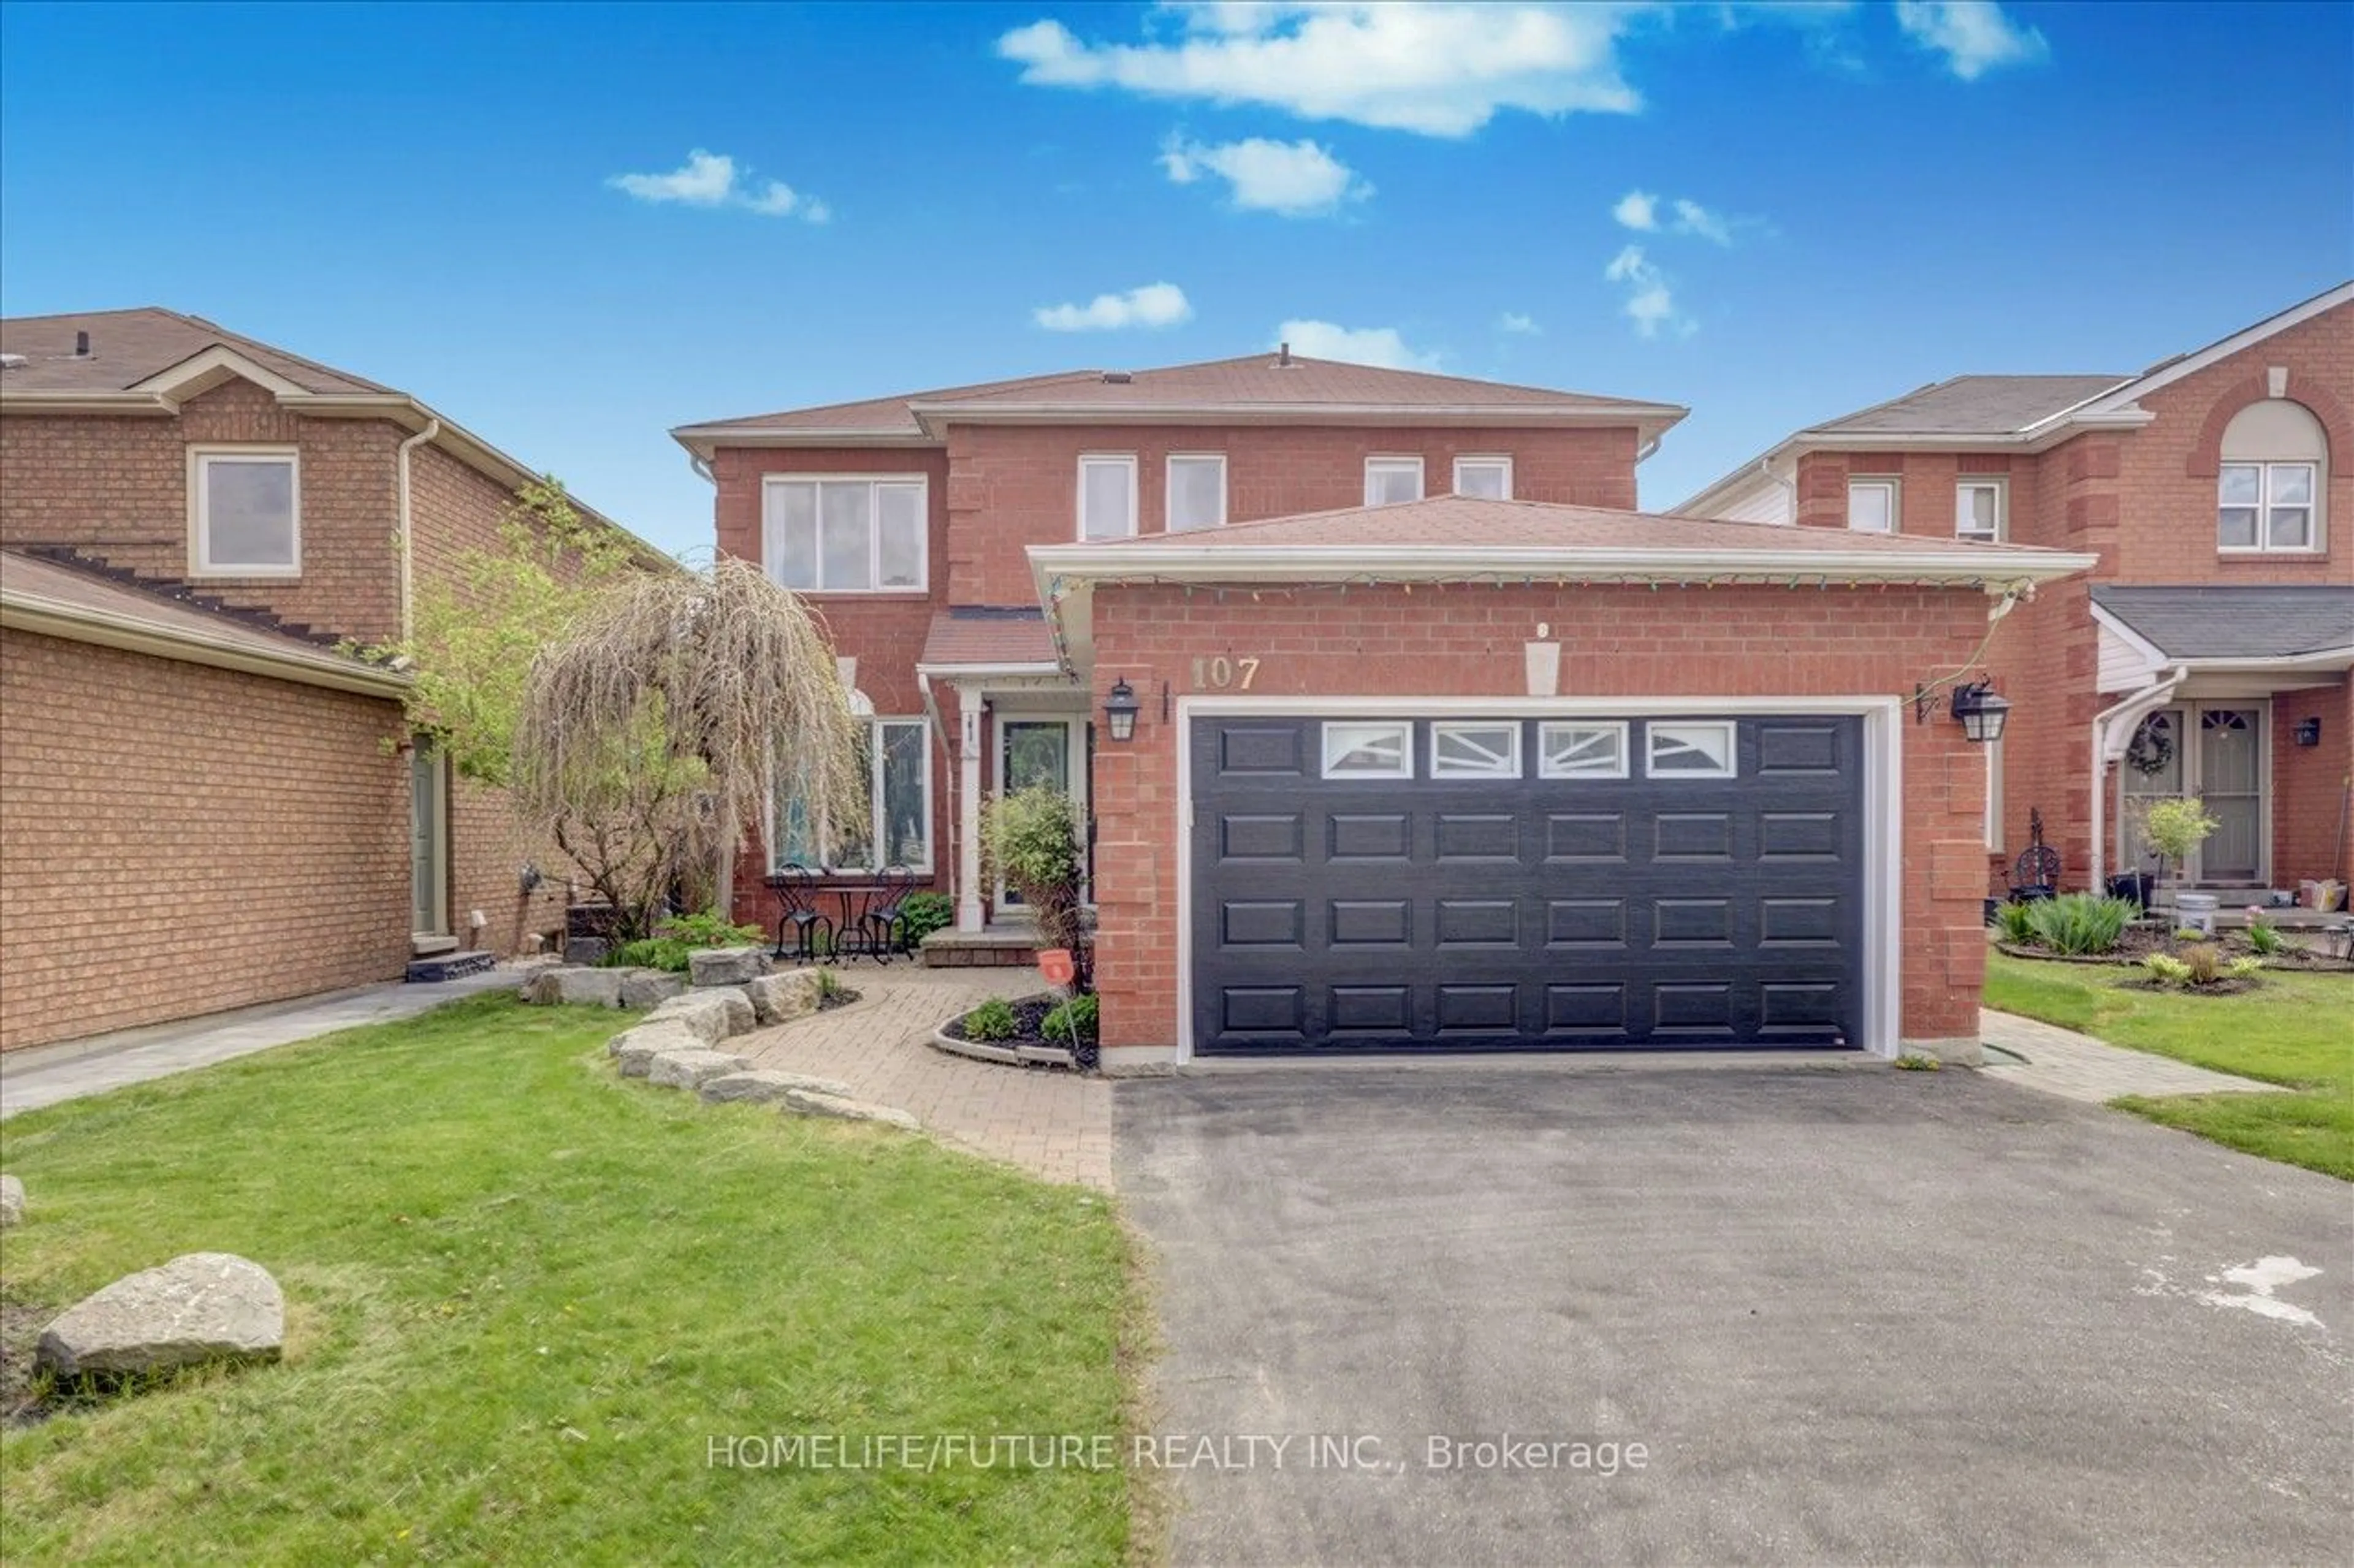 Home with brick exterior material for 107 Apple Blossom Blvd, Clarington Ontario L1C 4T7